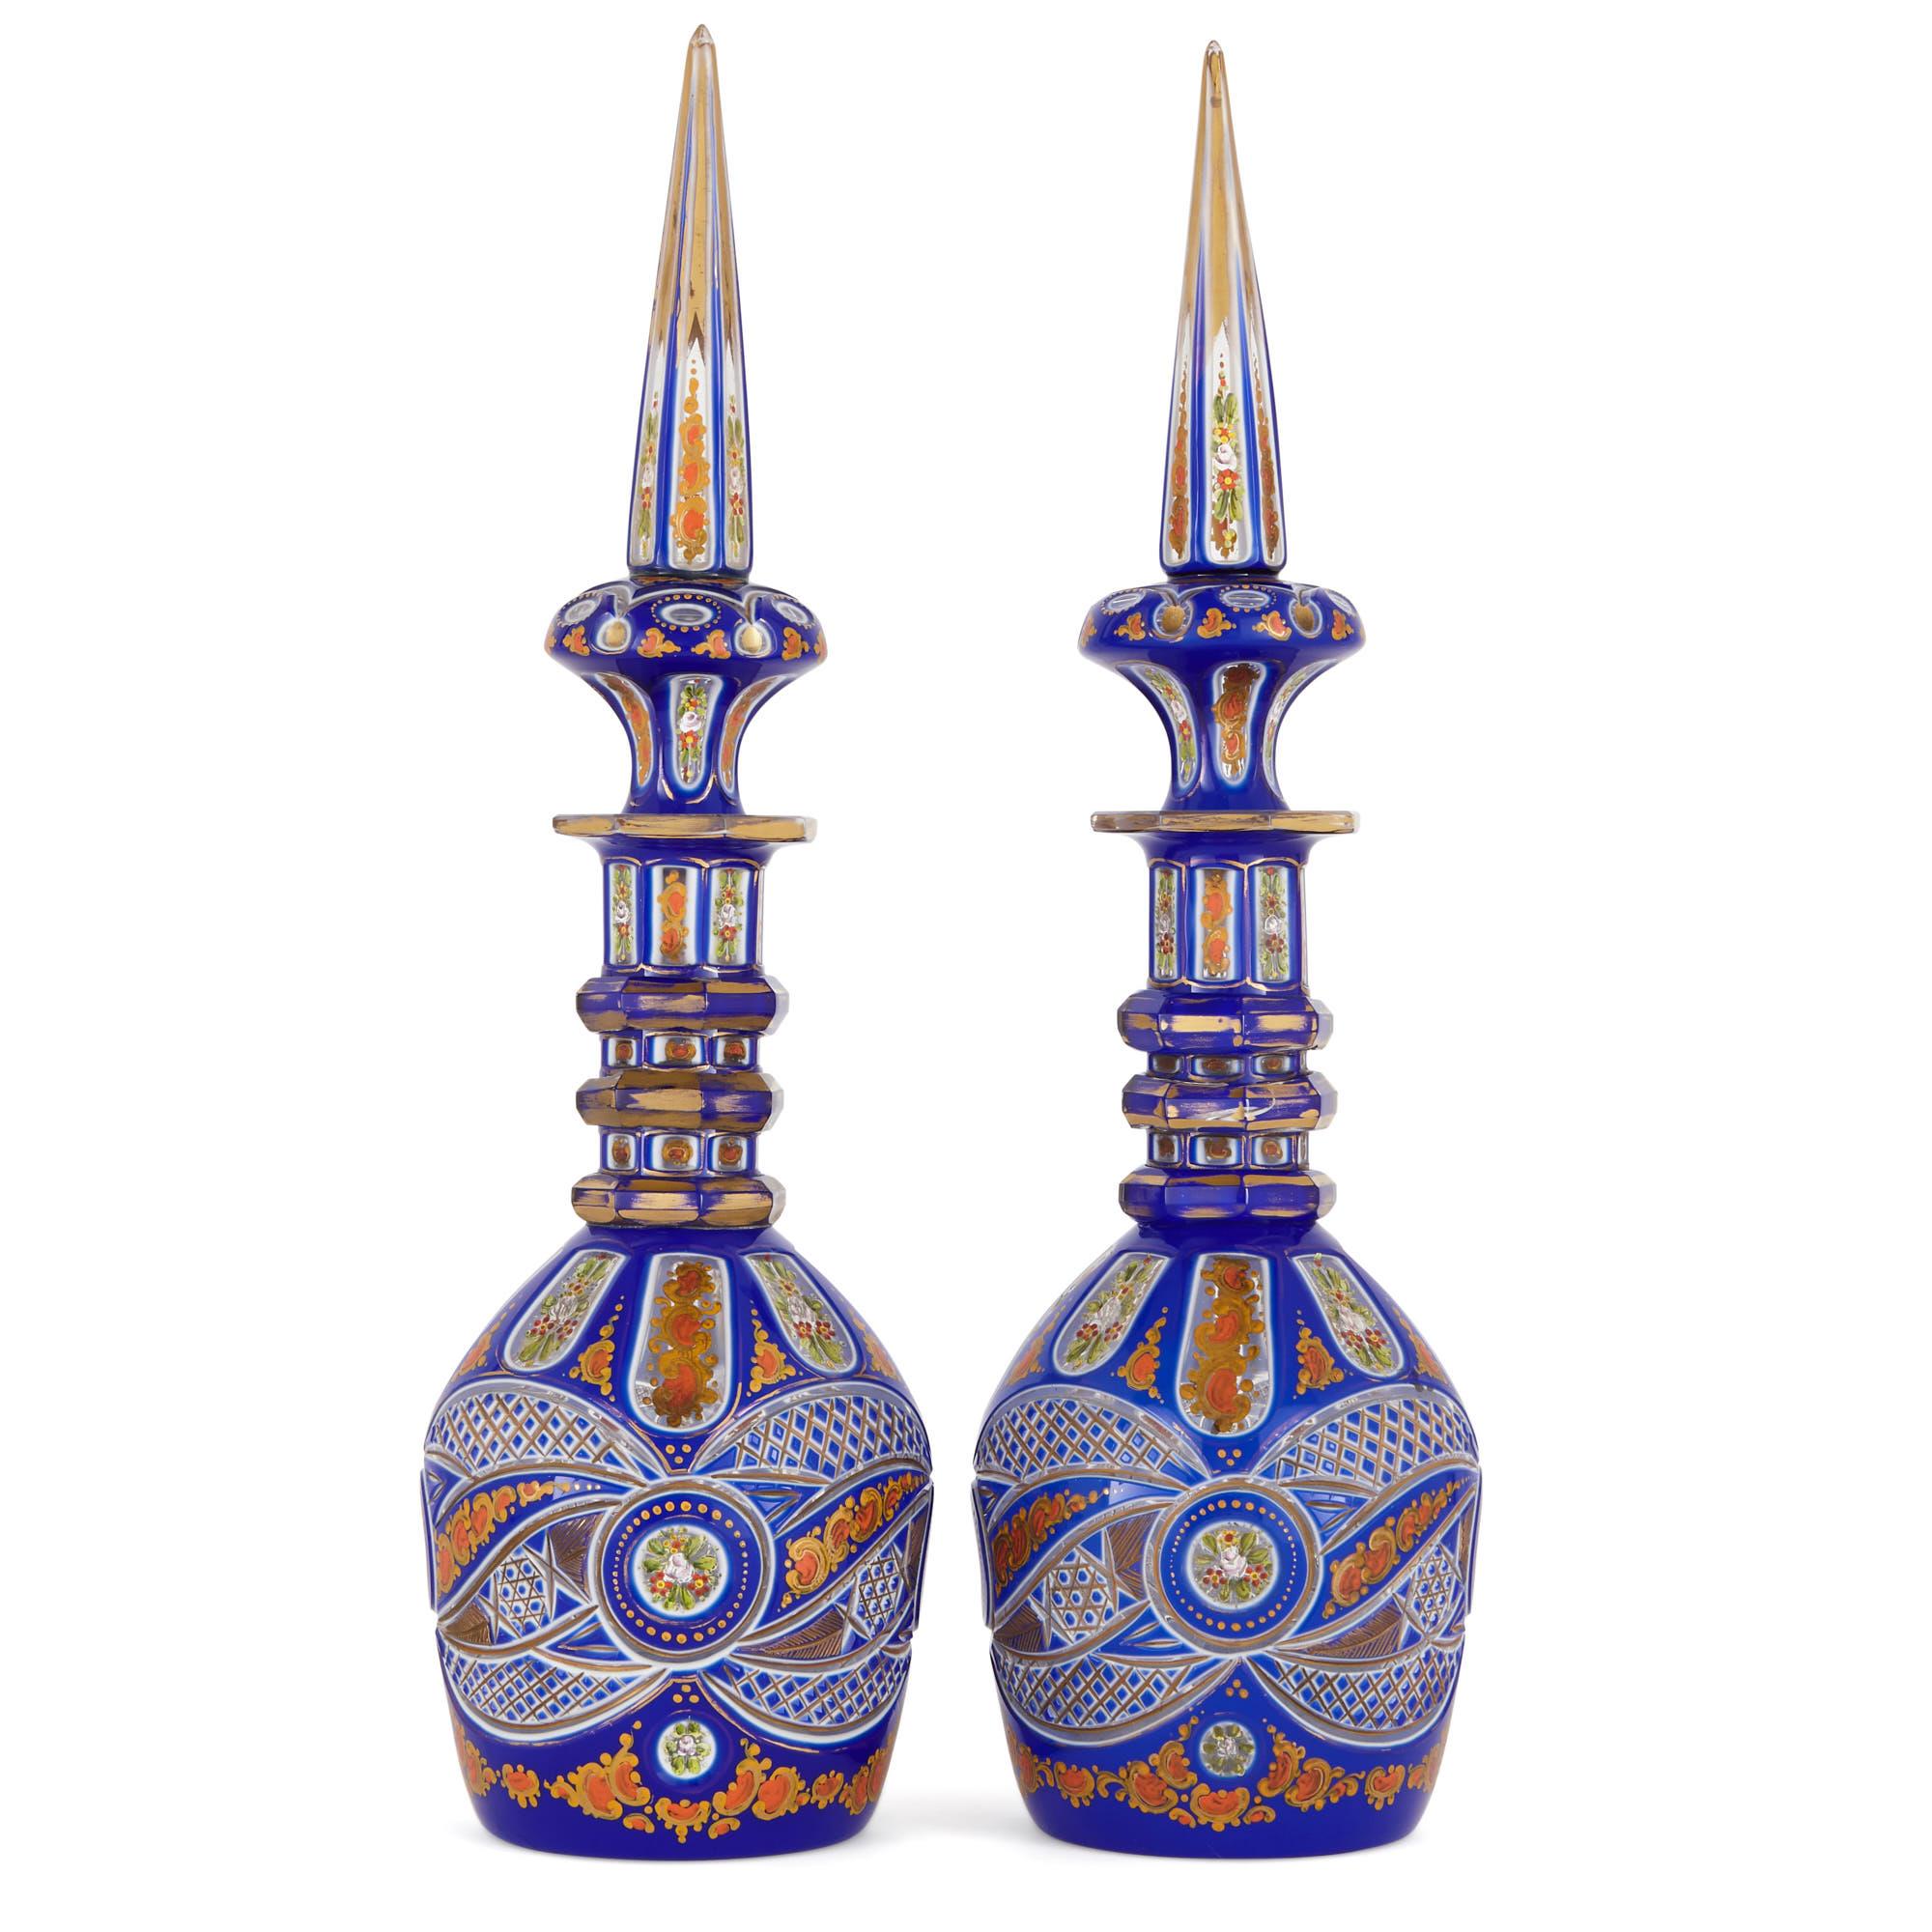 These wonderfully colourful glass decanters were created in the late 19th century in Bohemia (modern-day Czech Republic). For centuries, Bohemian glass has been prized for its high-quality workmanship and beautiful ornamentation.

The two